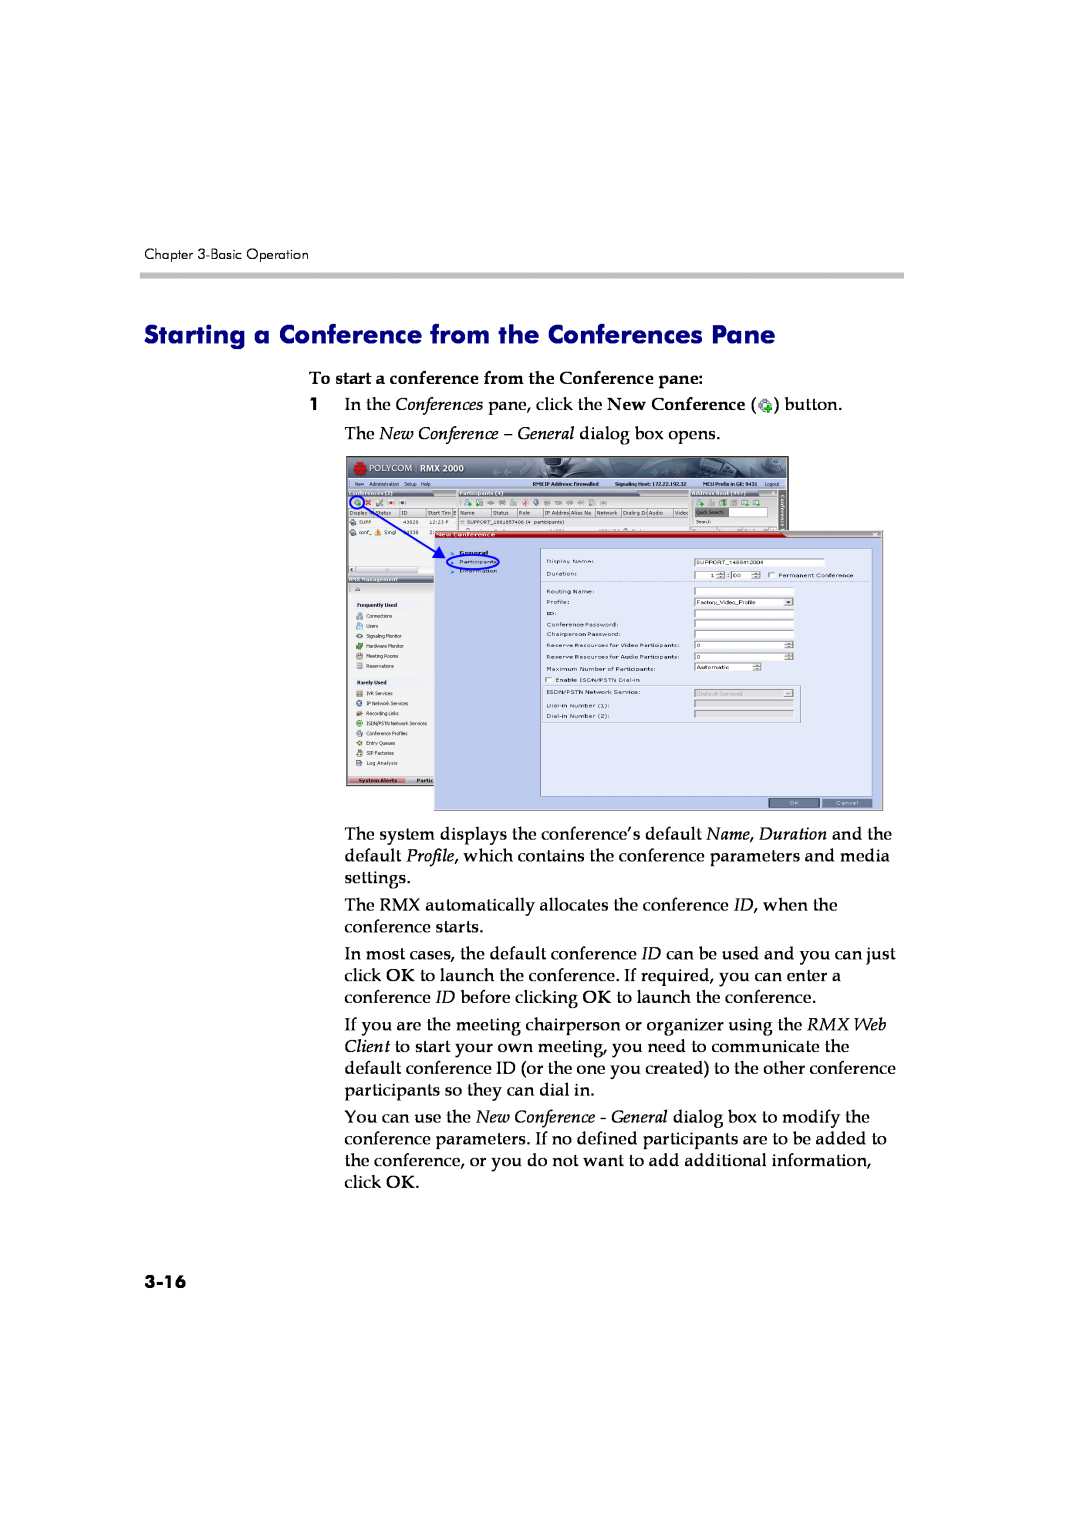 Polycom DOC2560B Starting a Conference from the Conferences Pane, To start a conference from the Conference pane, 3-16 